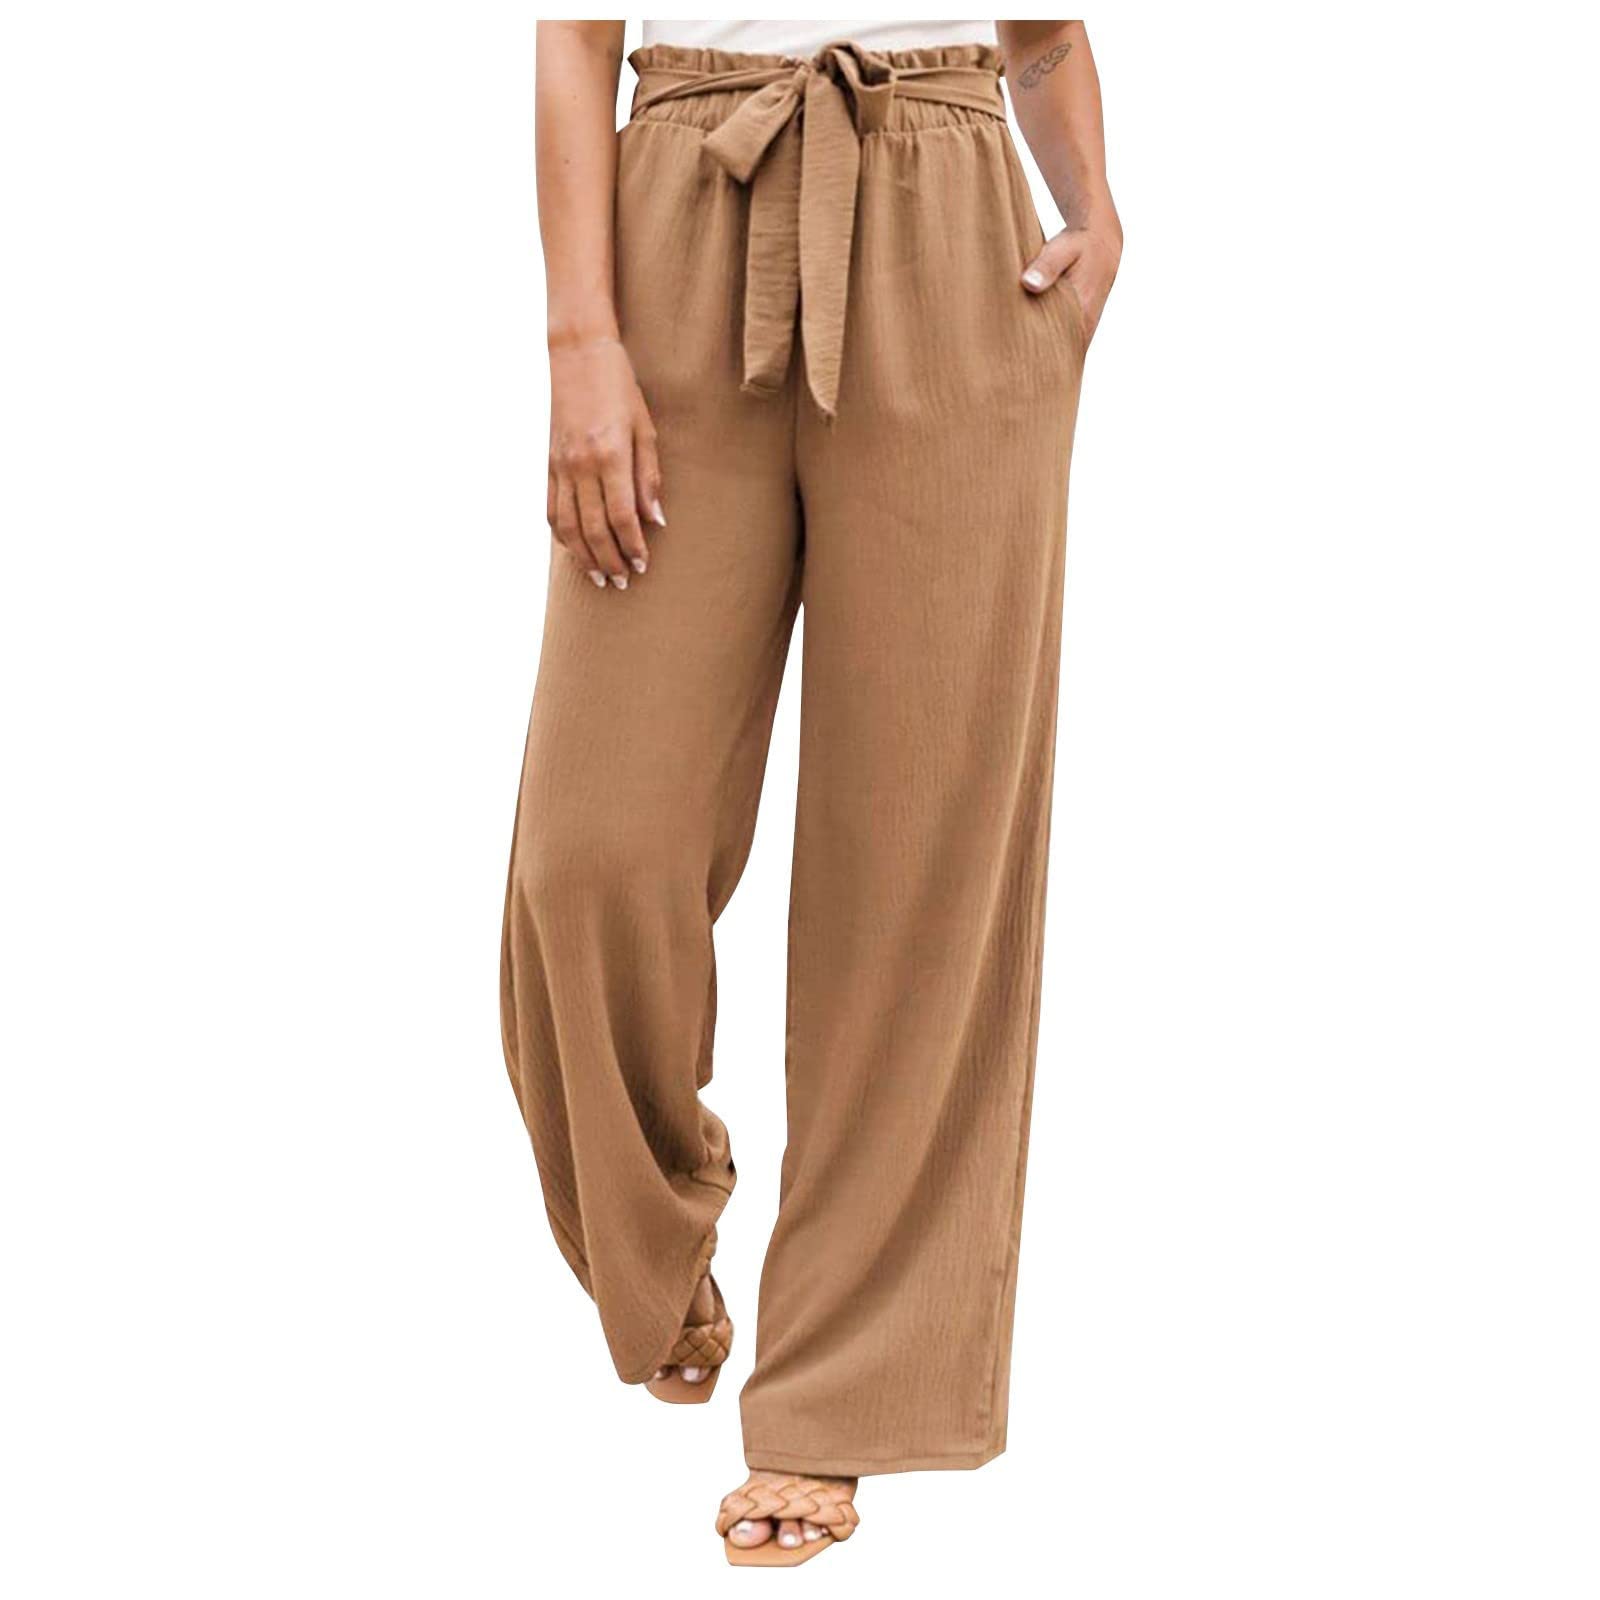 Womens Casual Trousers Elegant Plain Long Pants Loose Fit Straight  Elasticated Waist Pants with Drawstring Comfy Breathe Summer Beach Trousers  for Holiday Outgoing UK Size : Amazon.co.uk: Fashion